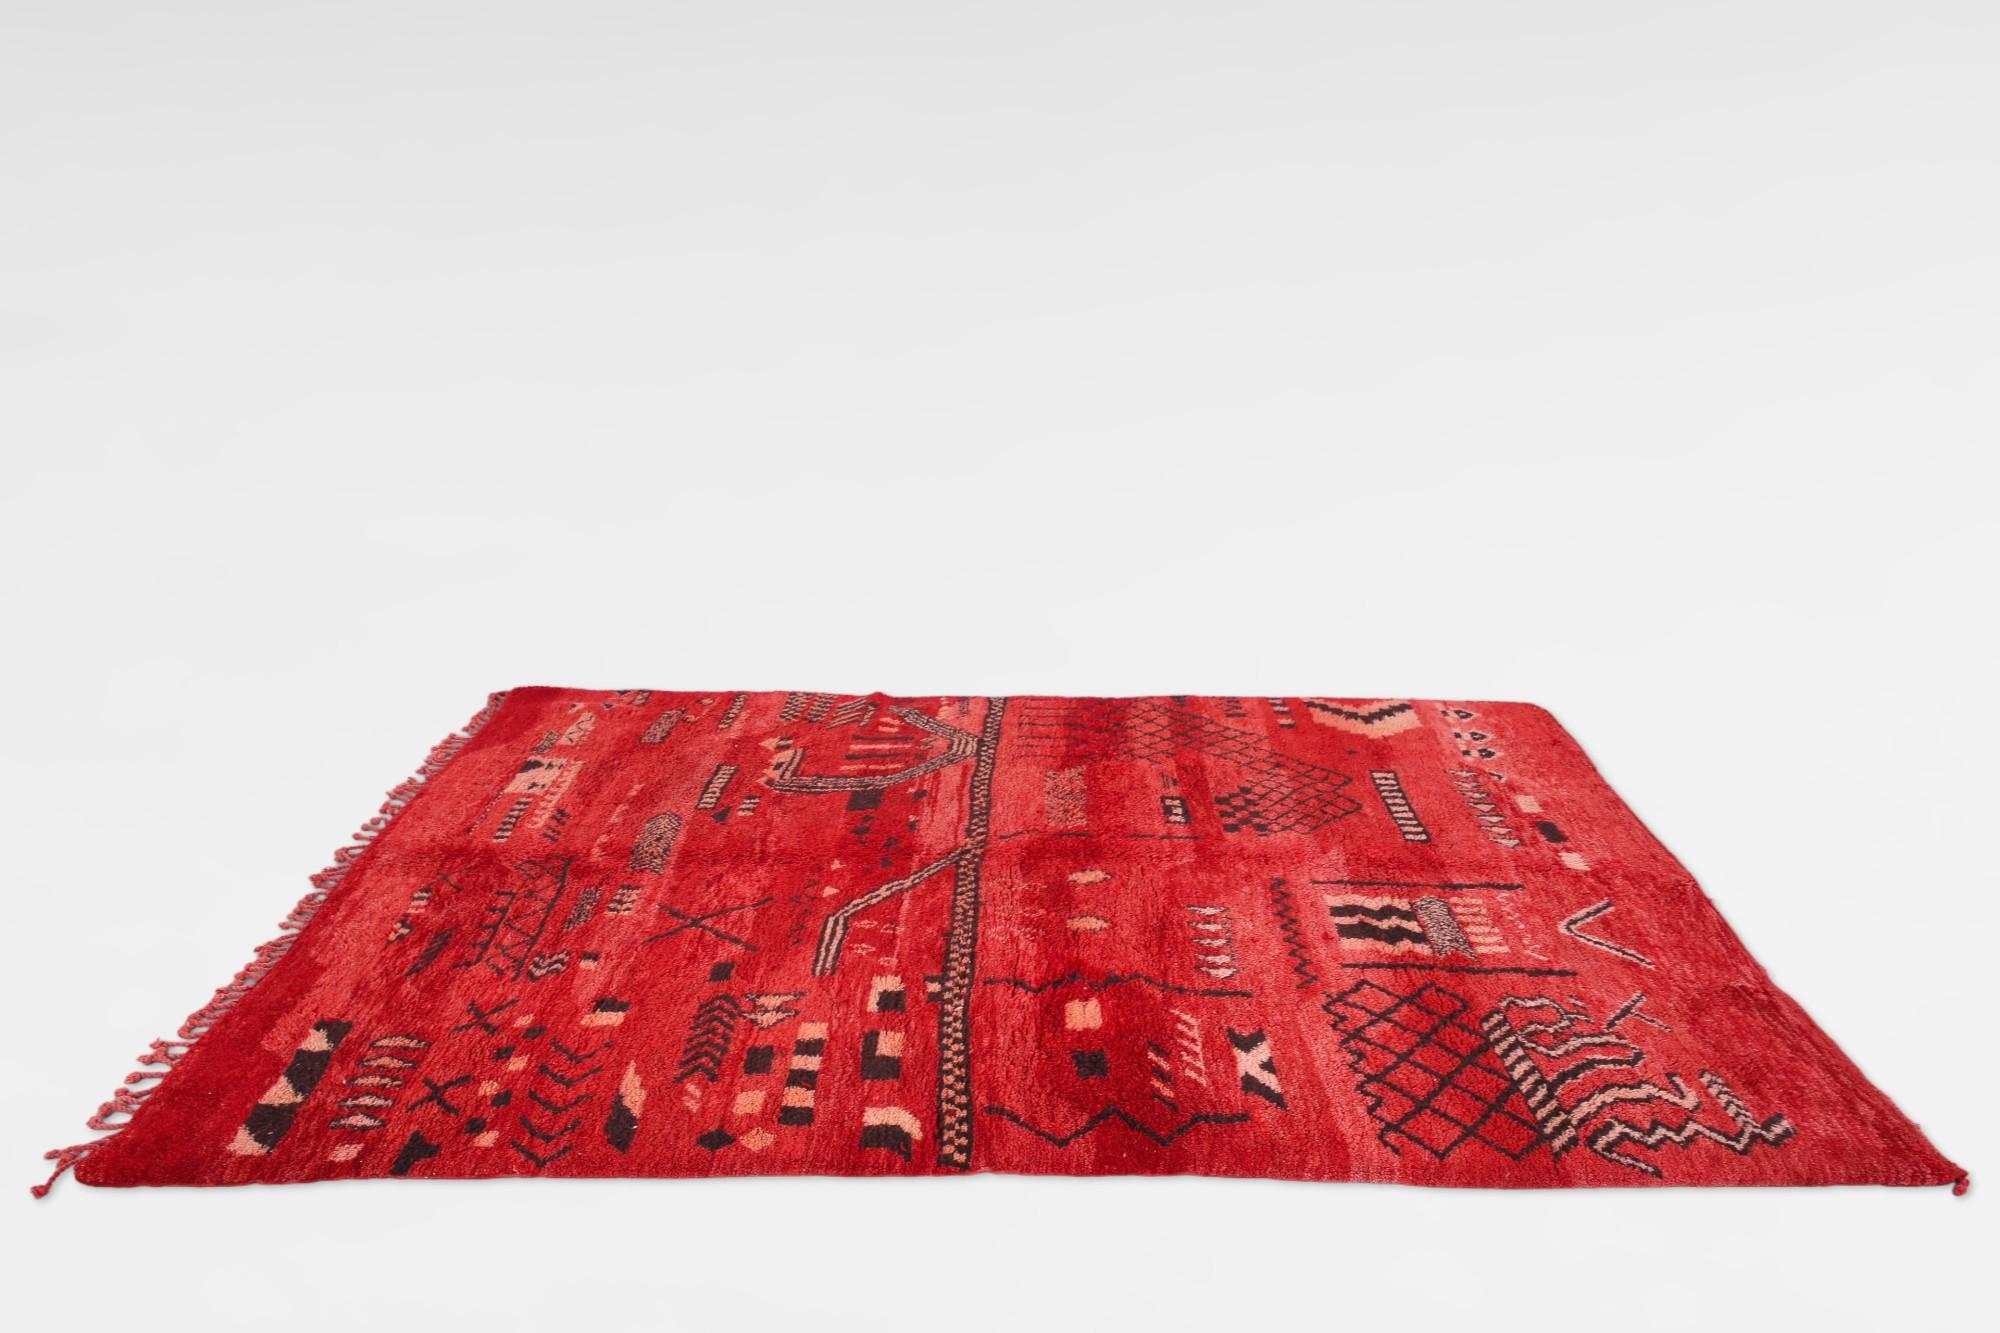 Vintage red Beni Mrirt Moroccan Rug, a timeless symbol of Moroccan weaving tradition. Crafted by skilled artisans of the Beni Mrirt tribe nestled in Morocco's Atlas Mountains, these rugs boast sumptuous texture, geometric designs, and serene earthy